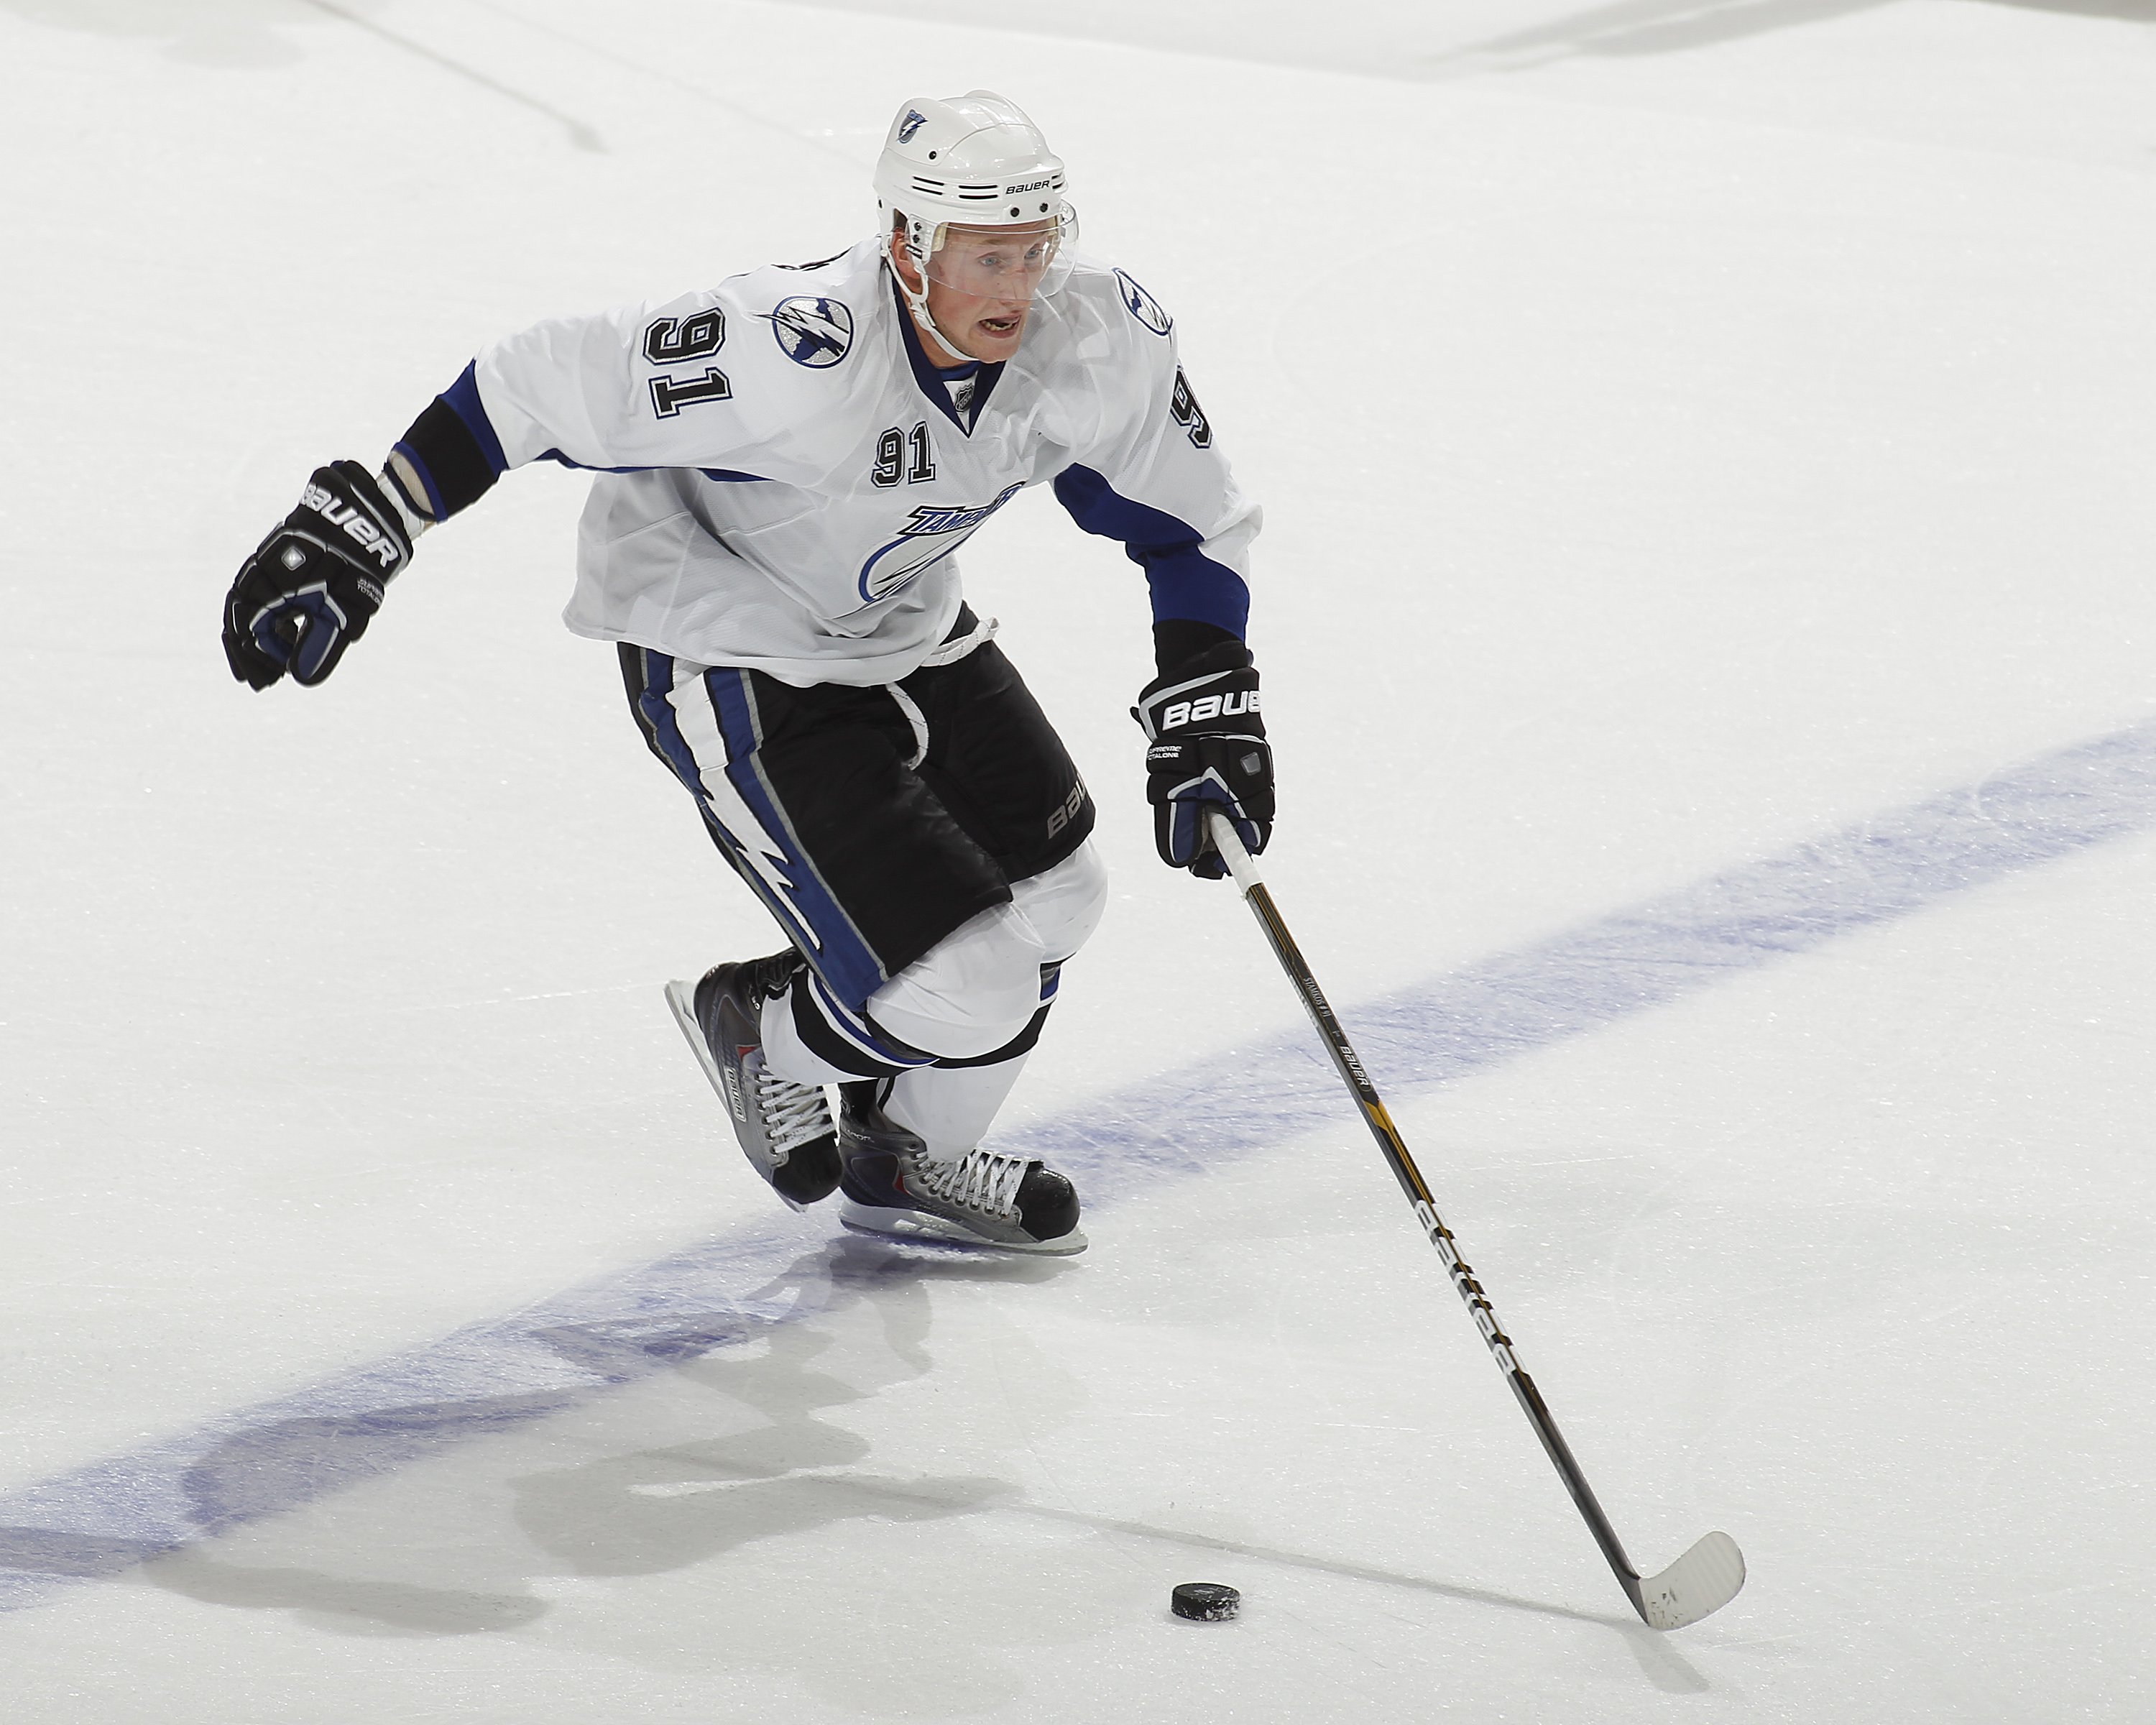 Lightning's Steven Stamkos is skating  and yes, it is allowed